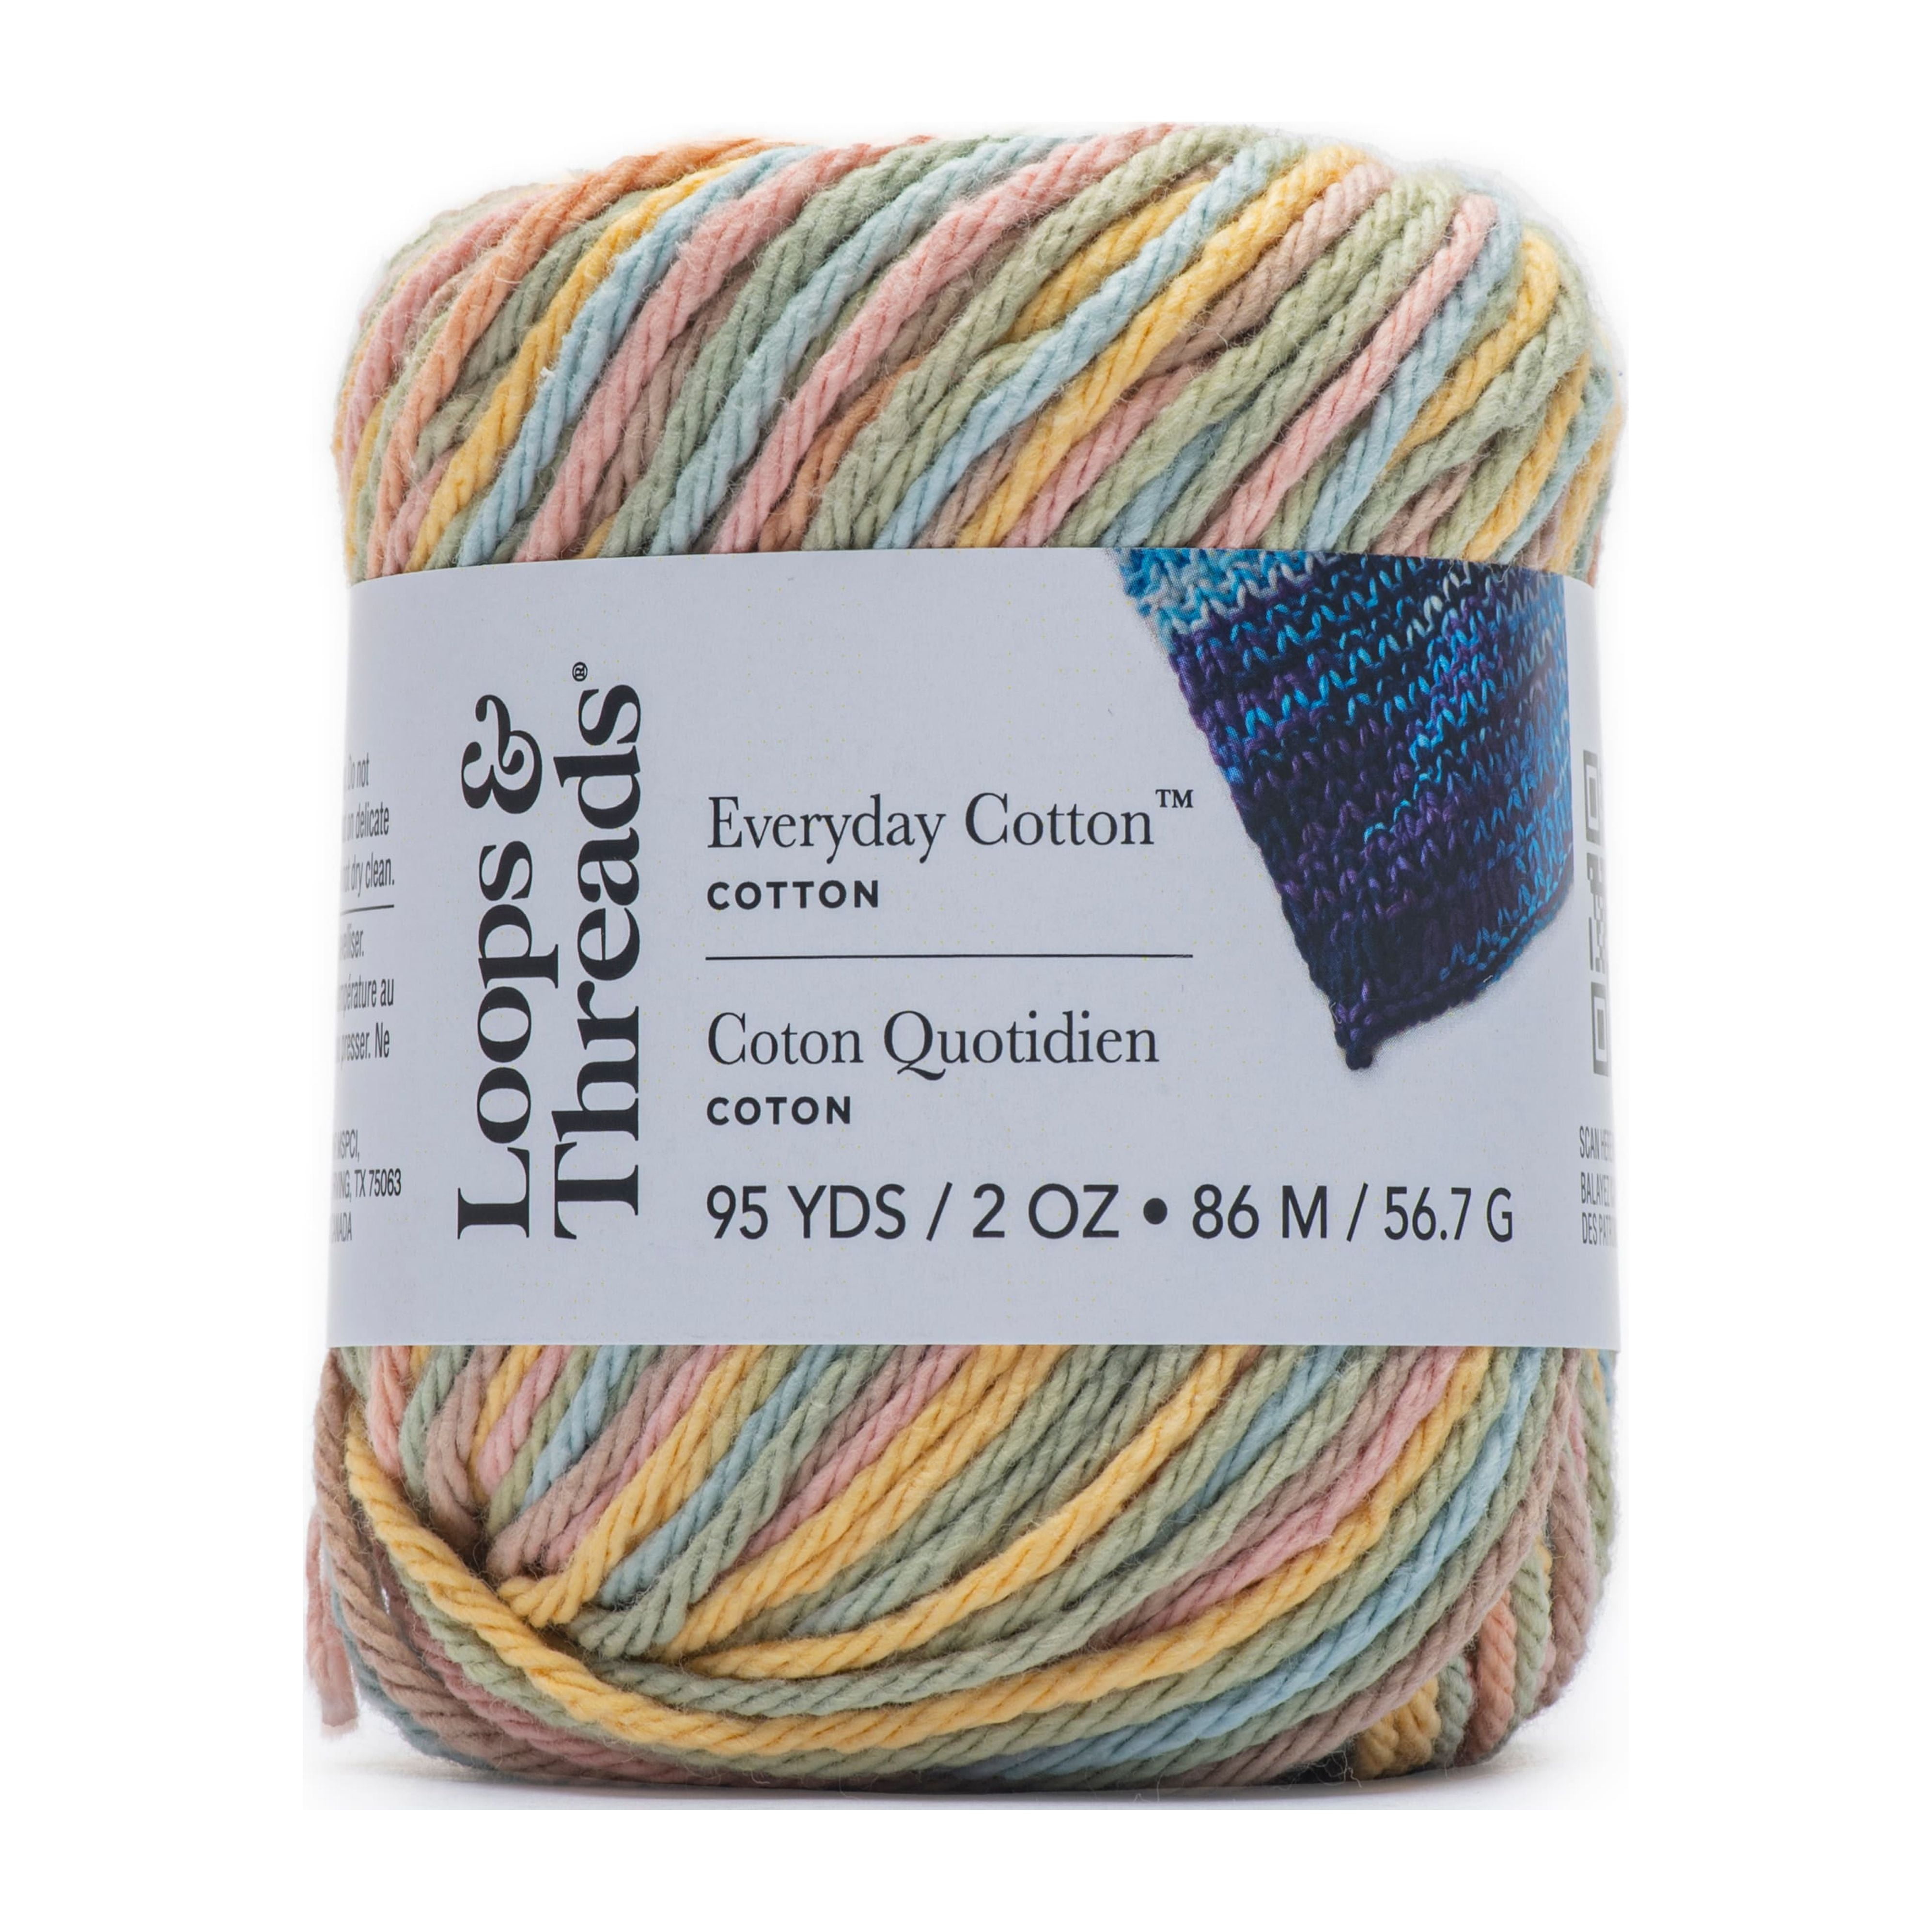 18 Pack: Everyday Cotton™ Patterned Yarn by Loops & Threads